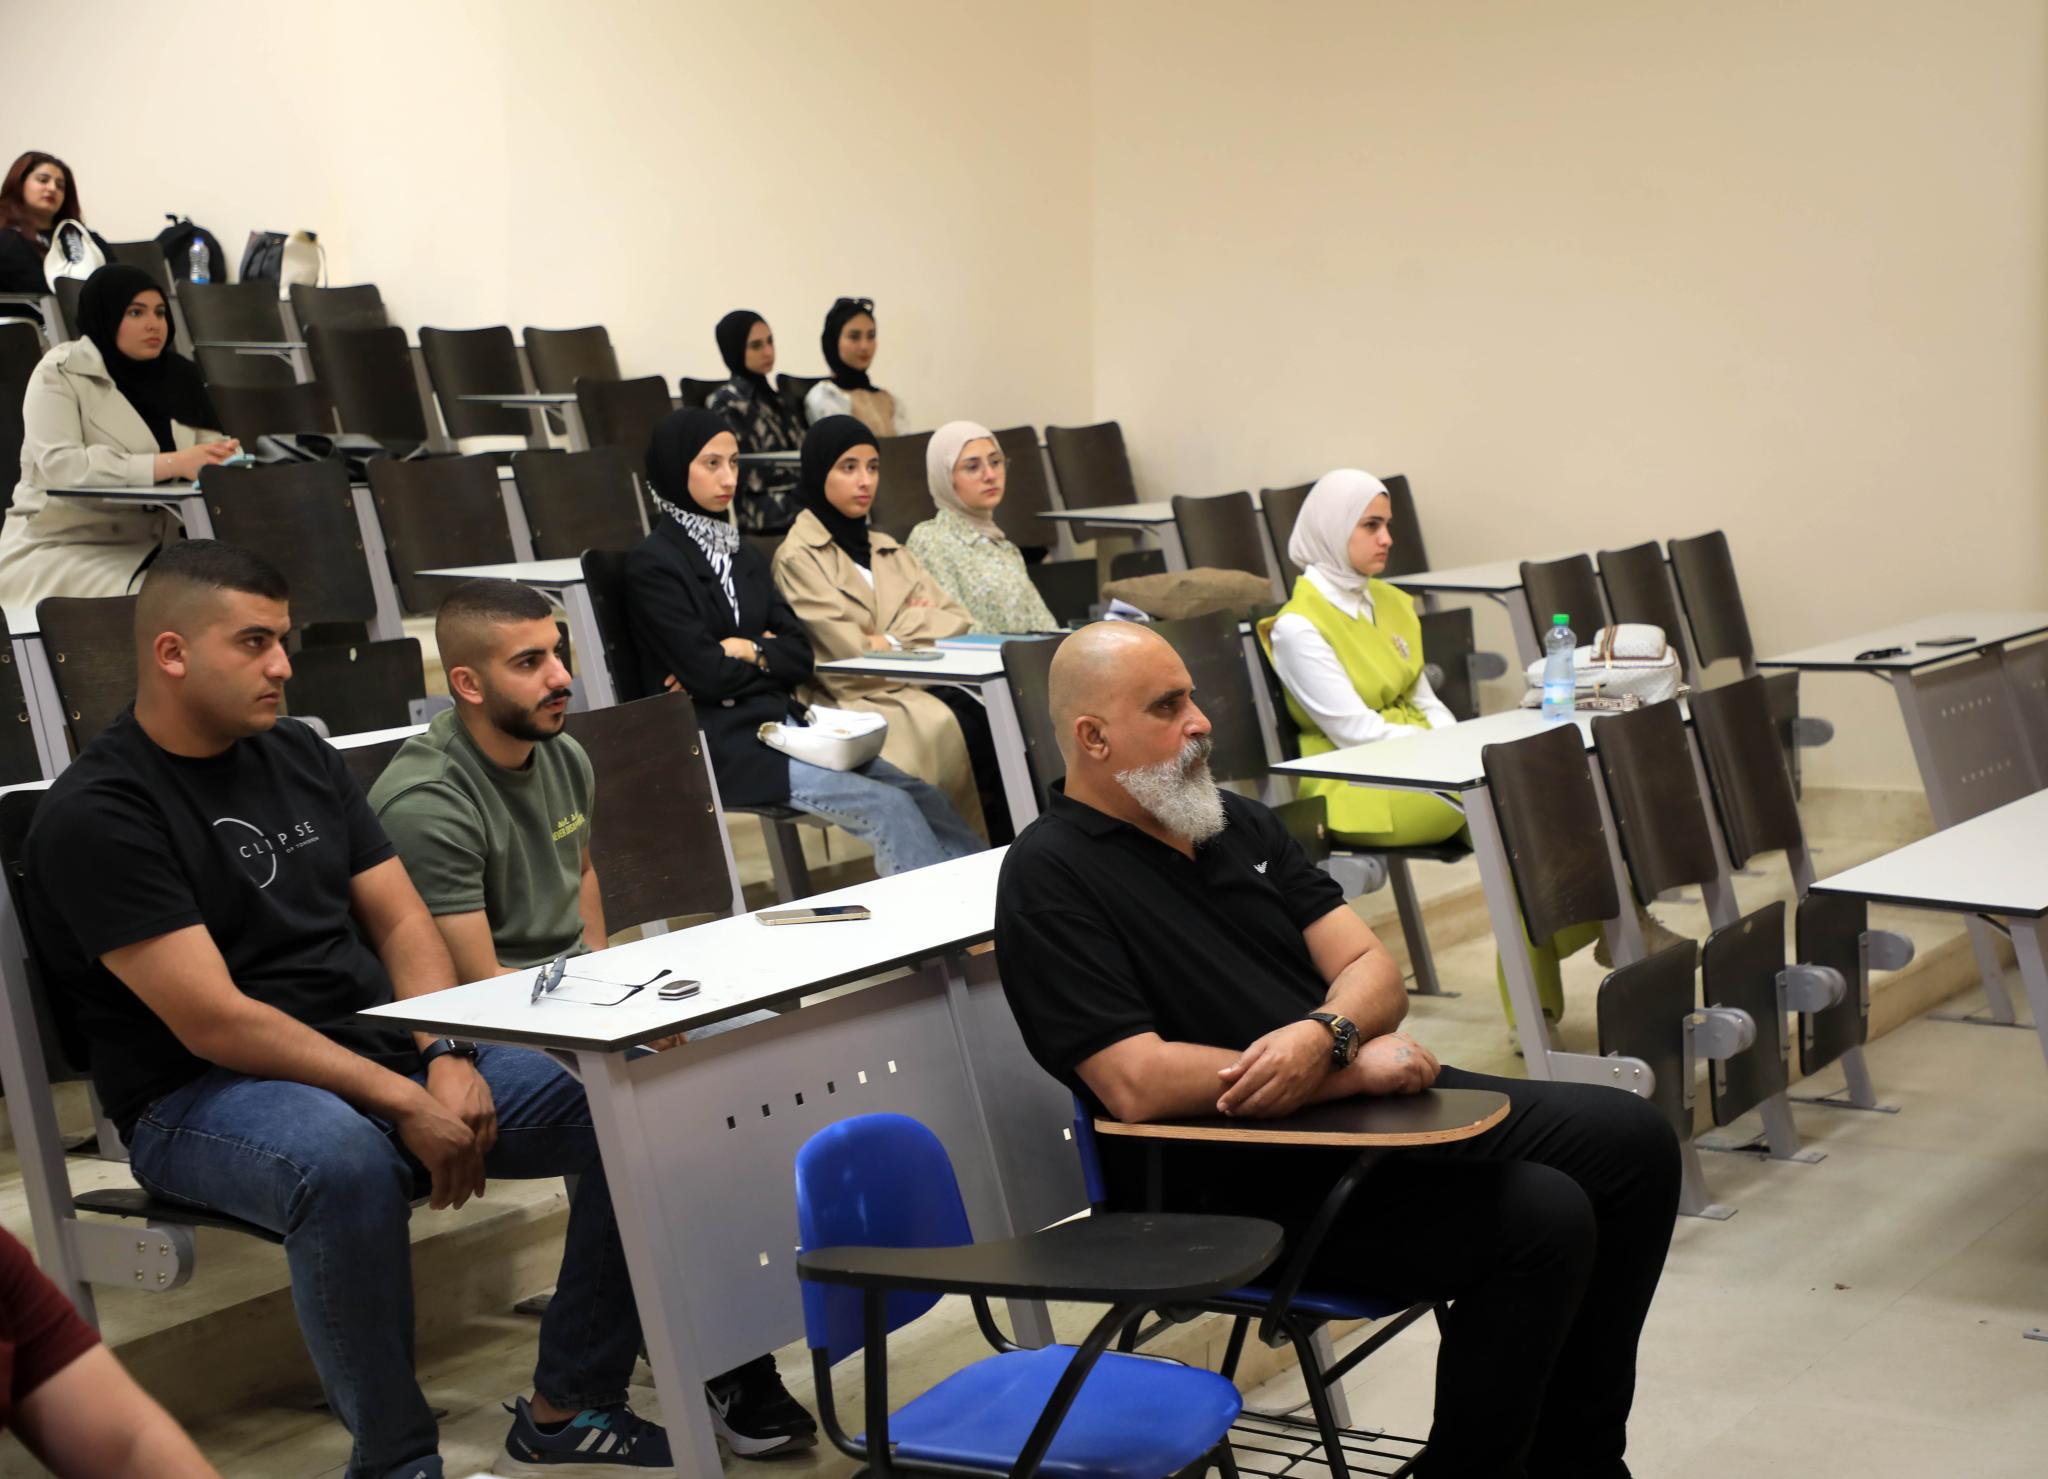 The Arab American University Holds a Symposium Titled “What’s New in the Current War”